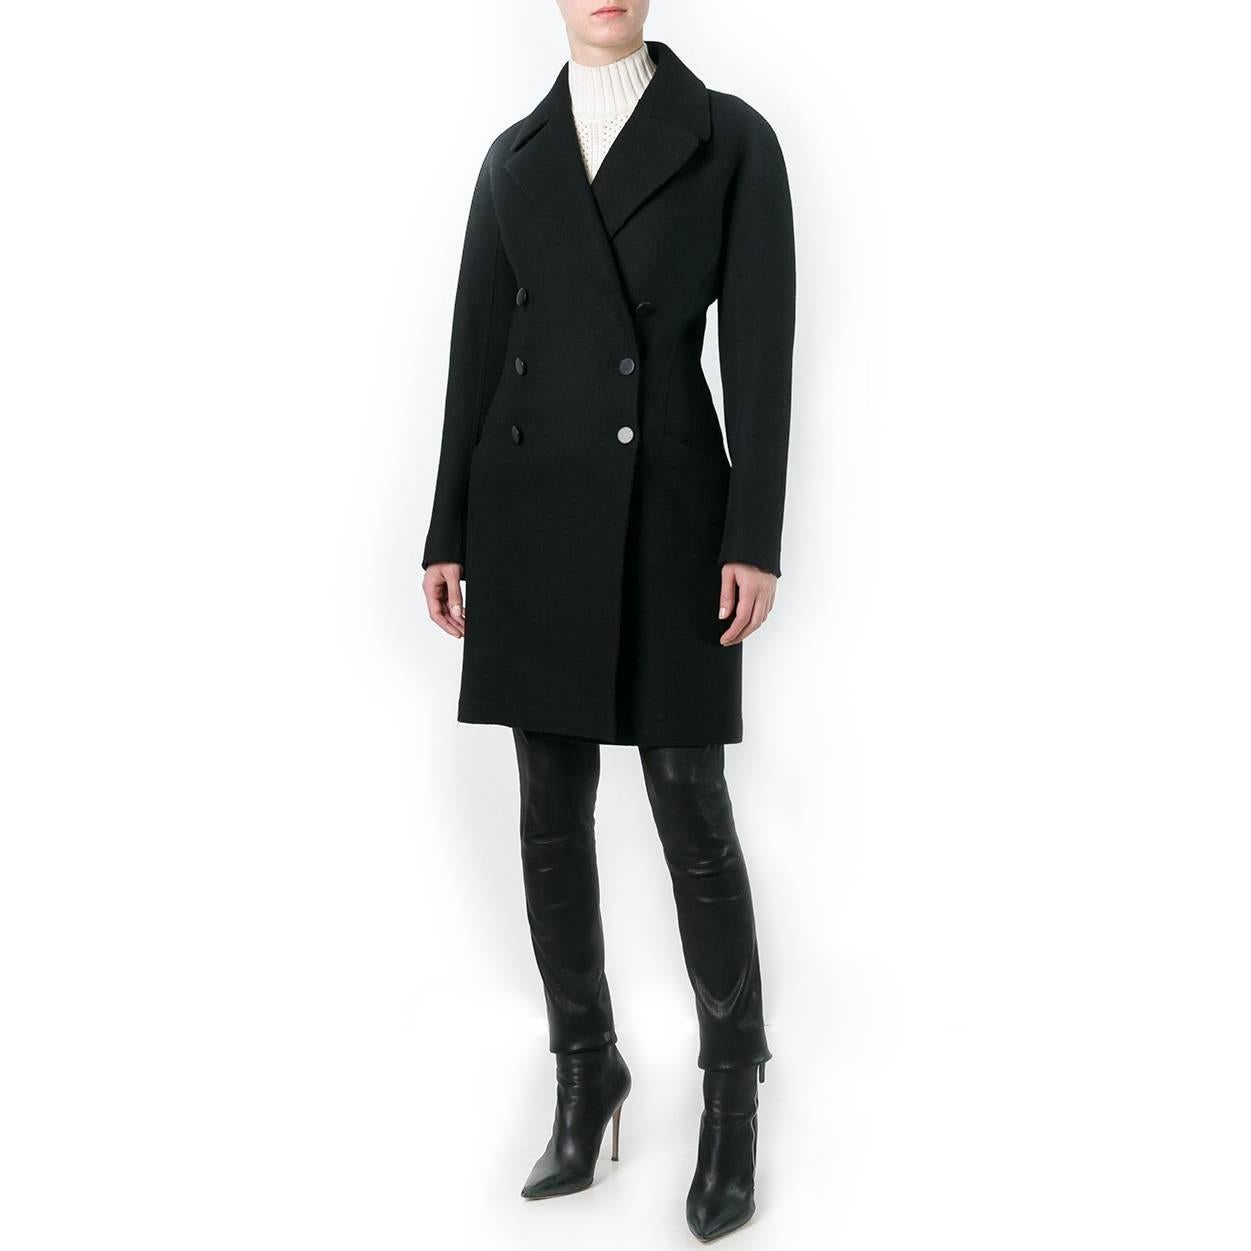 Bring the iconic elegance of Alaïa to your wintery wardrobe. This vintage Alaïa black double-breasted wool coat is tailored to sculptural perfection, finished with the house’s typical flattering style lines.